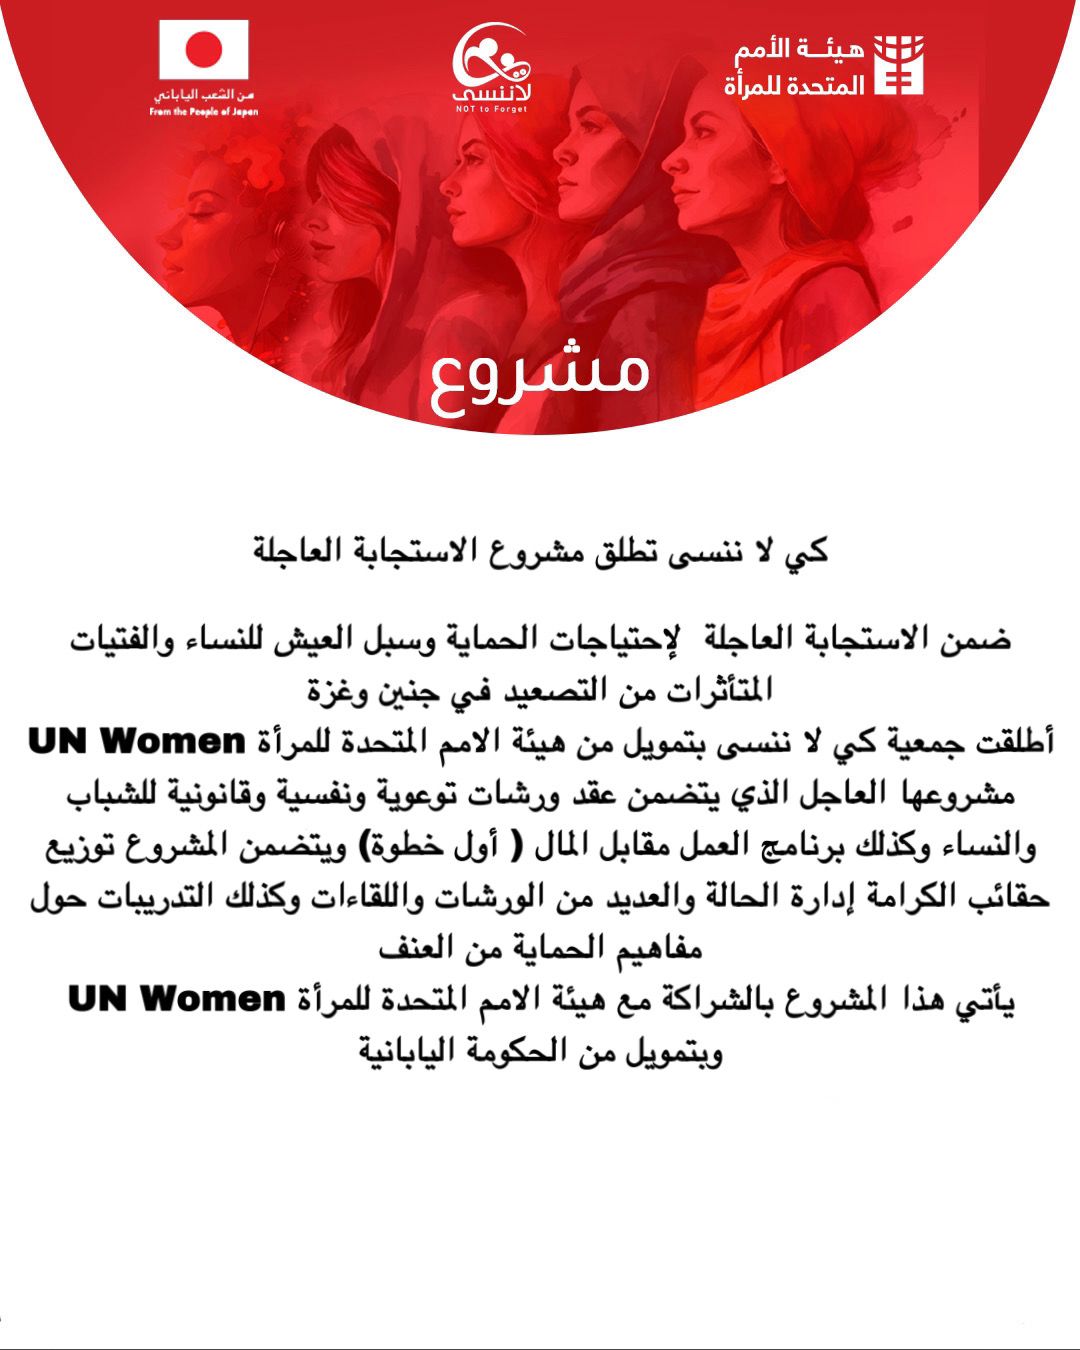 Not To Forget Association launched an emergency project funded by UN Women